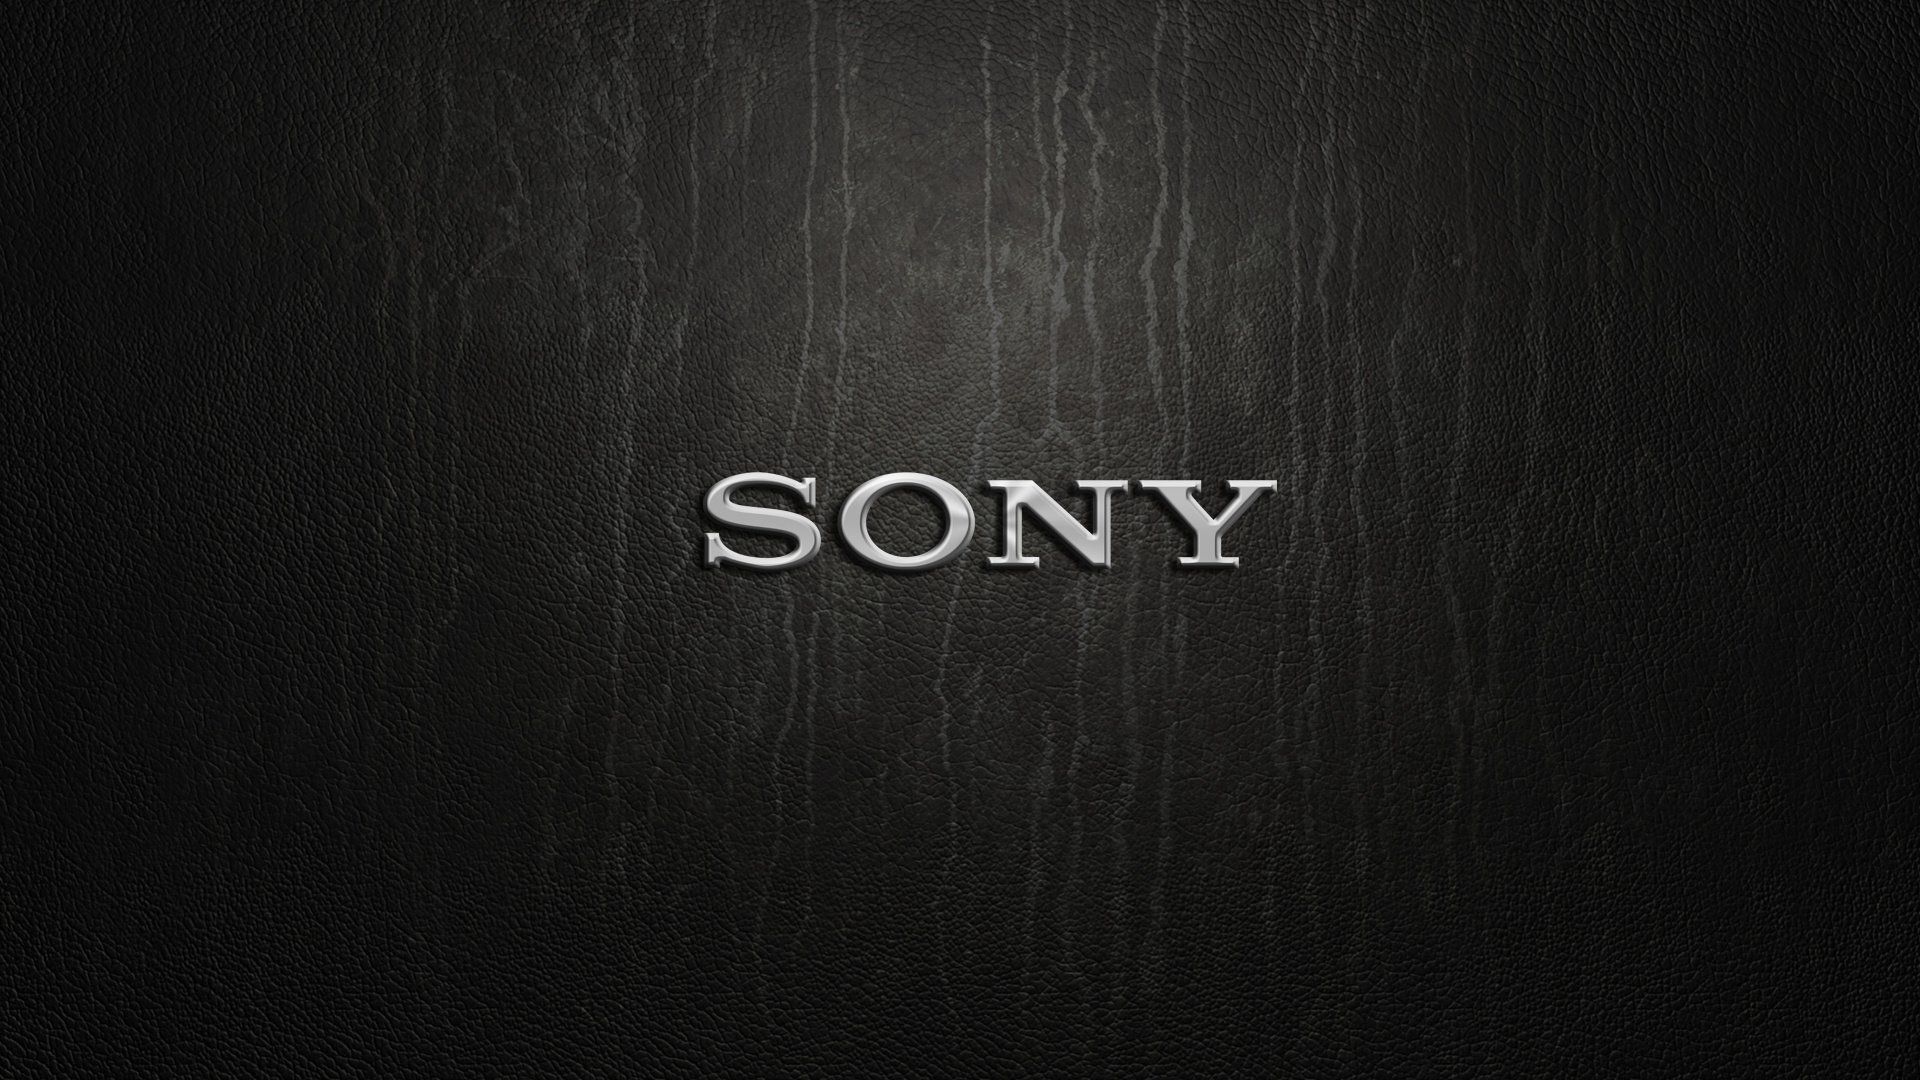 Sony, HD wallpapers, Quality images, High-definition, 1920x1080 Full HD Desktop